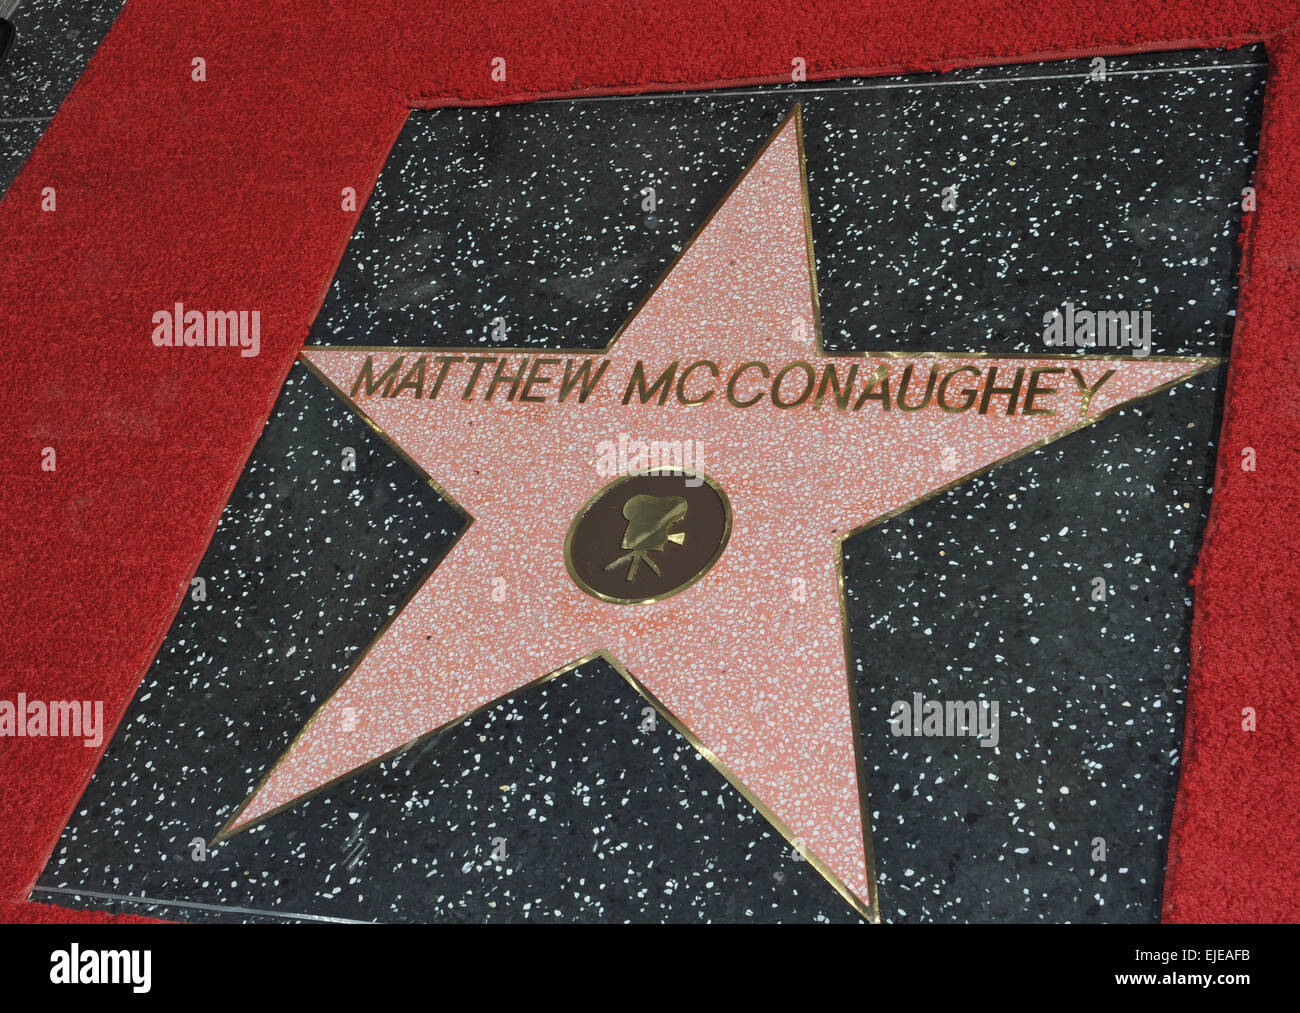 LOS ANGELES, CA - NOVEMBER 17, 2014: Actor Matthew McConaughey's star on Hollywood Boulevard where he was honored with the 2,534th star on the Hollywood Walk of Fame. Stock Photo